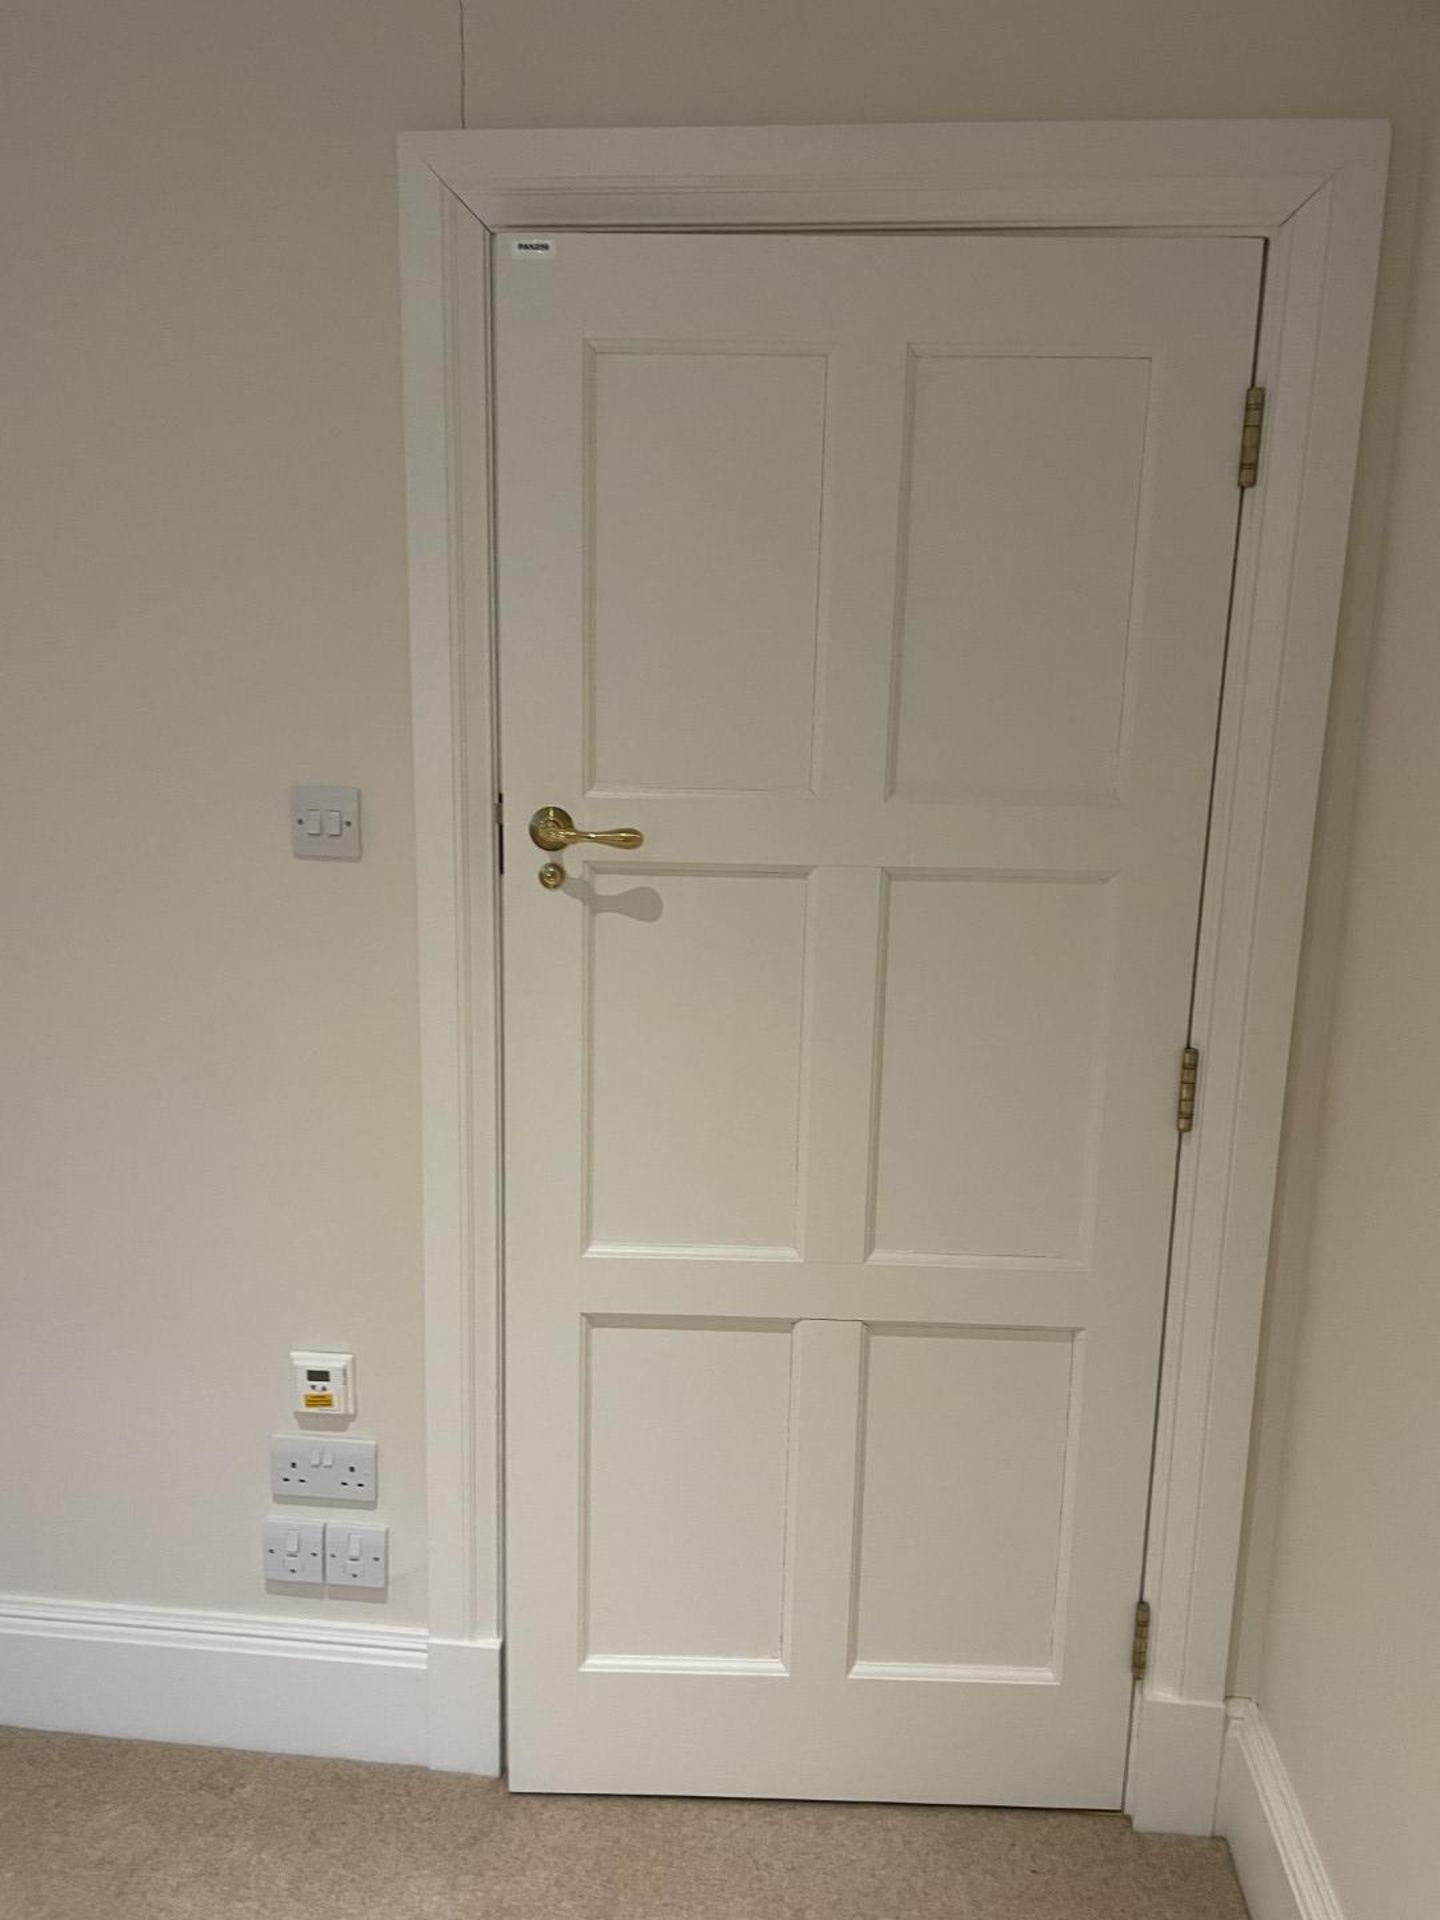 1 x Solid Wood Painted Lockable Internal Door in White - Includes Handles and Hinges - Image 7 of 12